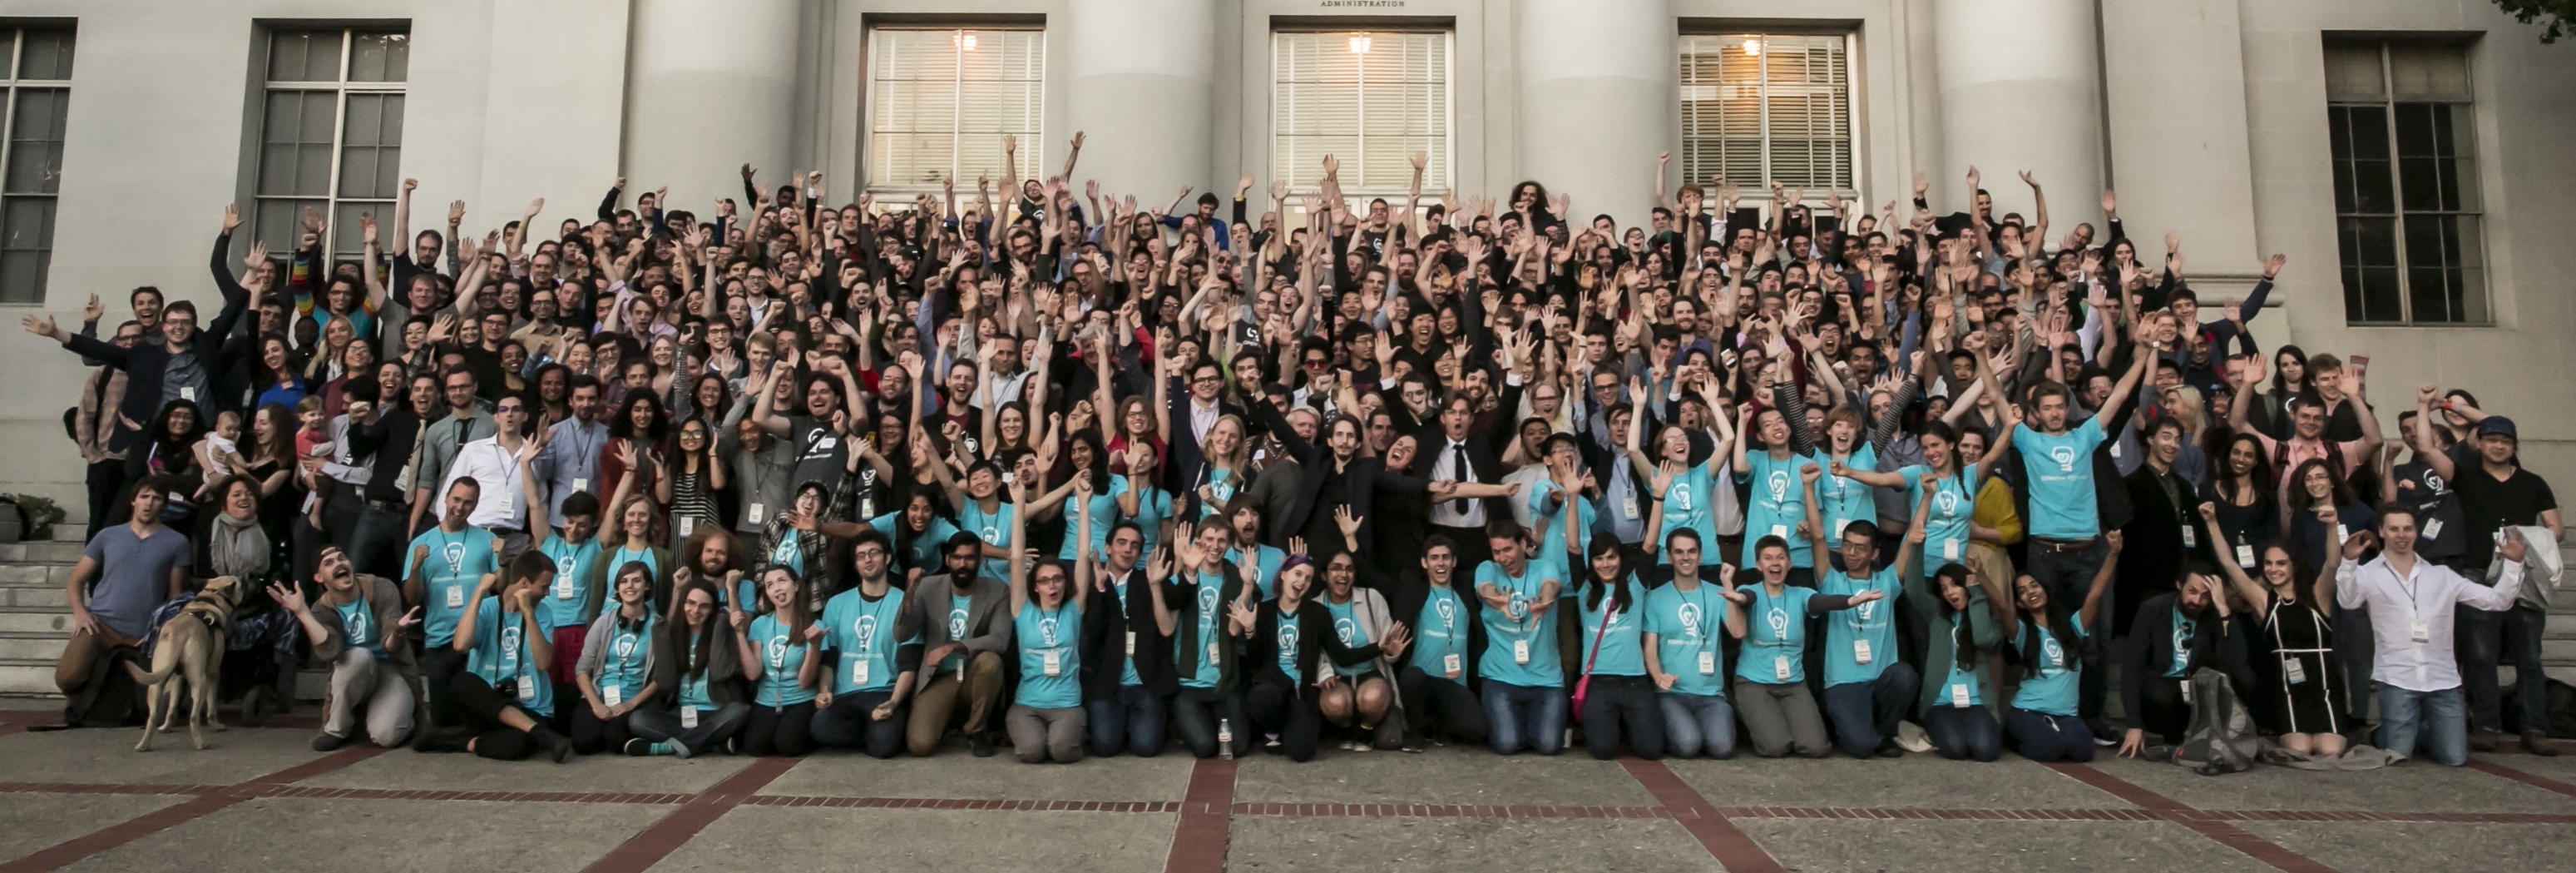 EA Global 2016 Group Photo Arms Up 1